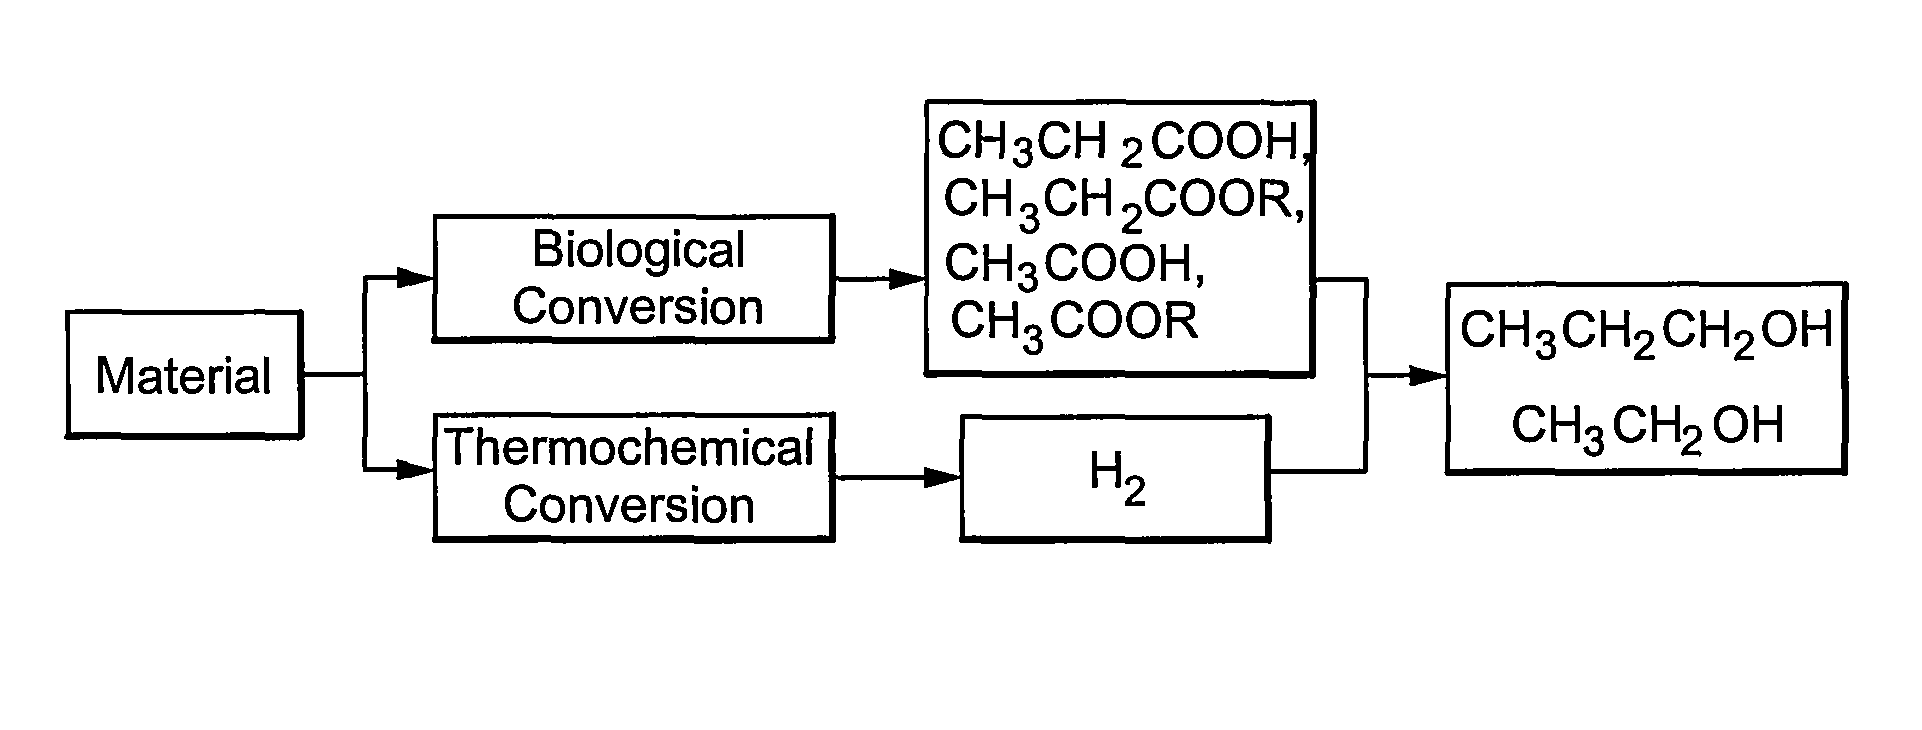 Method of making propanol and ethanol from plant material by biological conversion and gasification